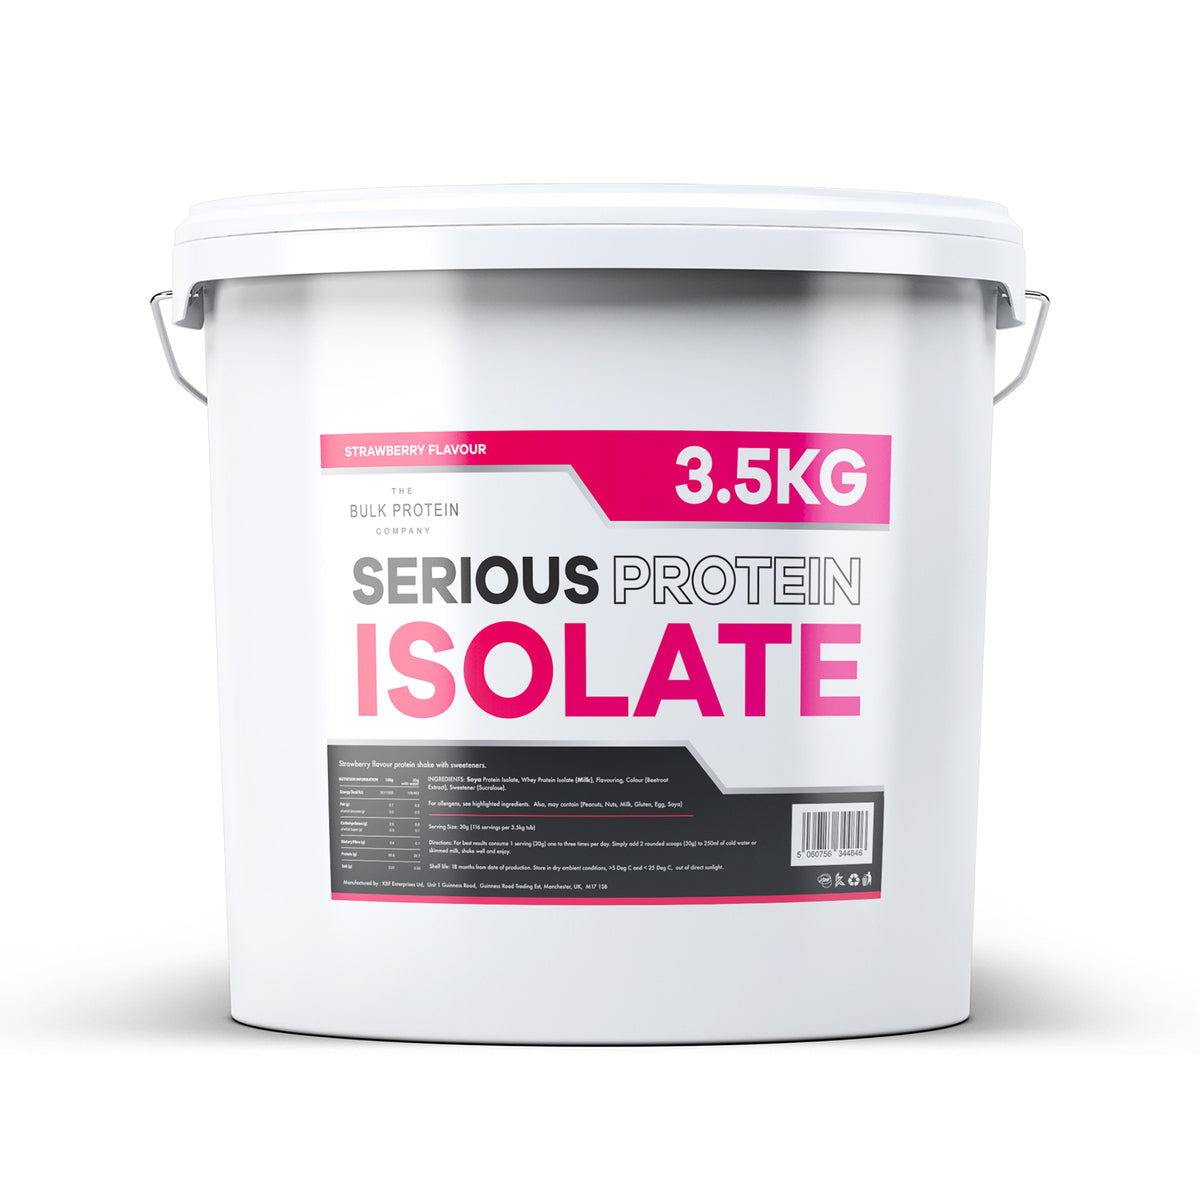 The Bulk Protein Company Serious Protein Isolate €“ 3.5kg